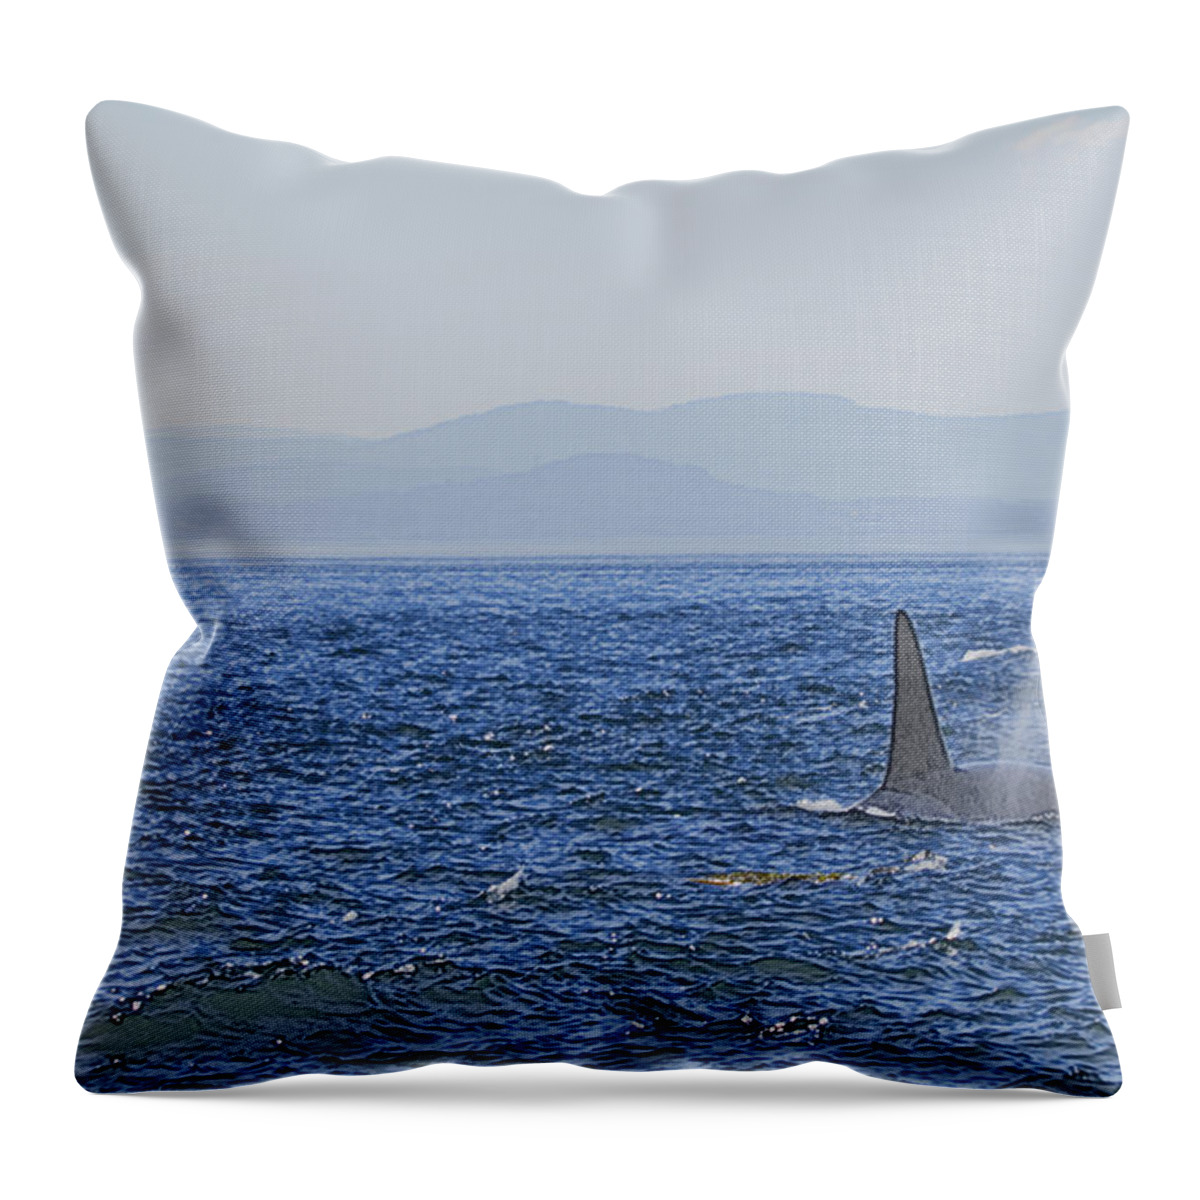 Orca Whales Throw Pillow featuring the photograph There She Blows by Tom Kelly